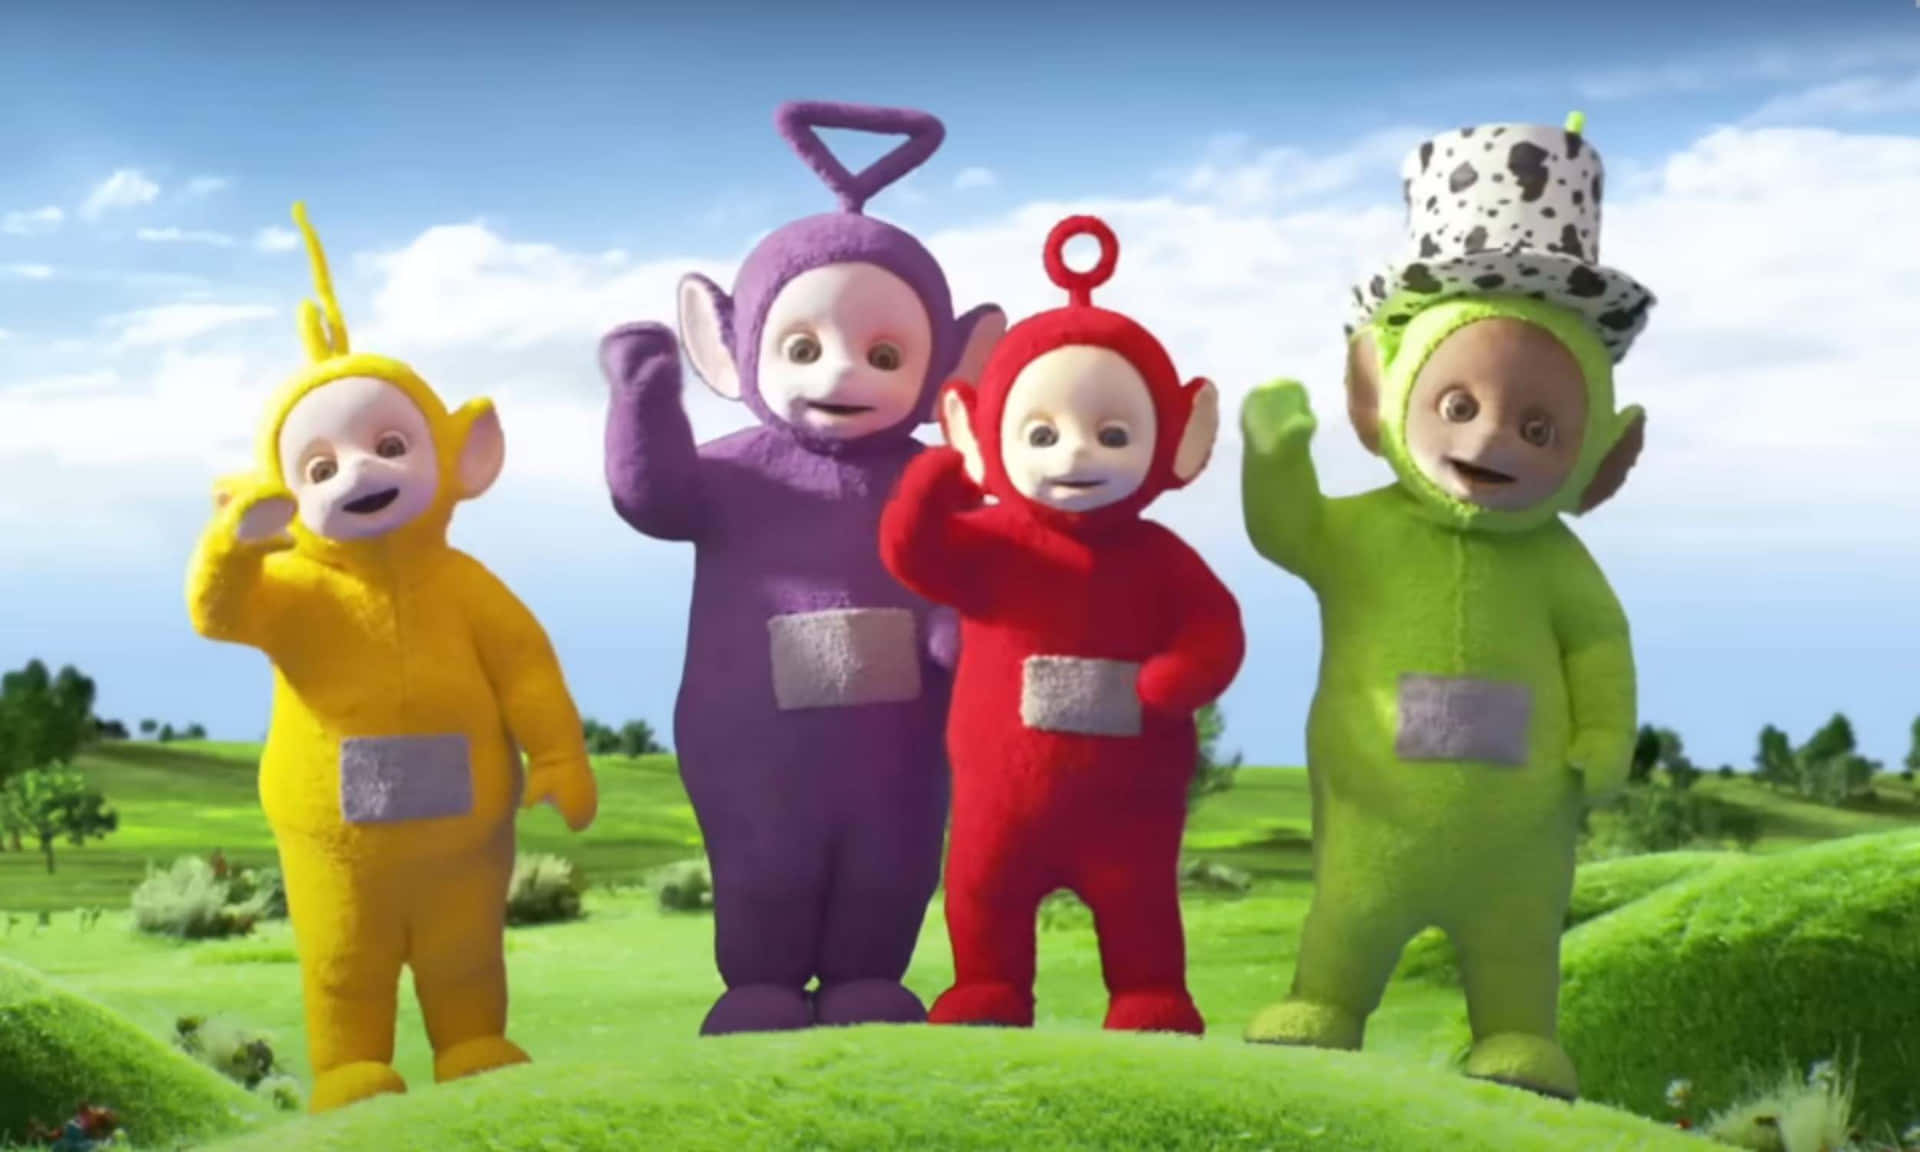 Enjoying the Sunny Day with Teletubbies